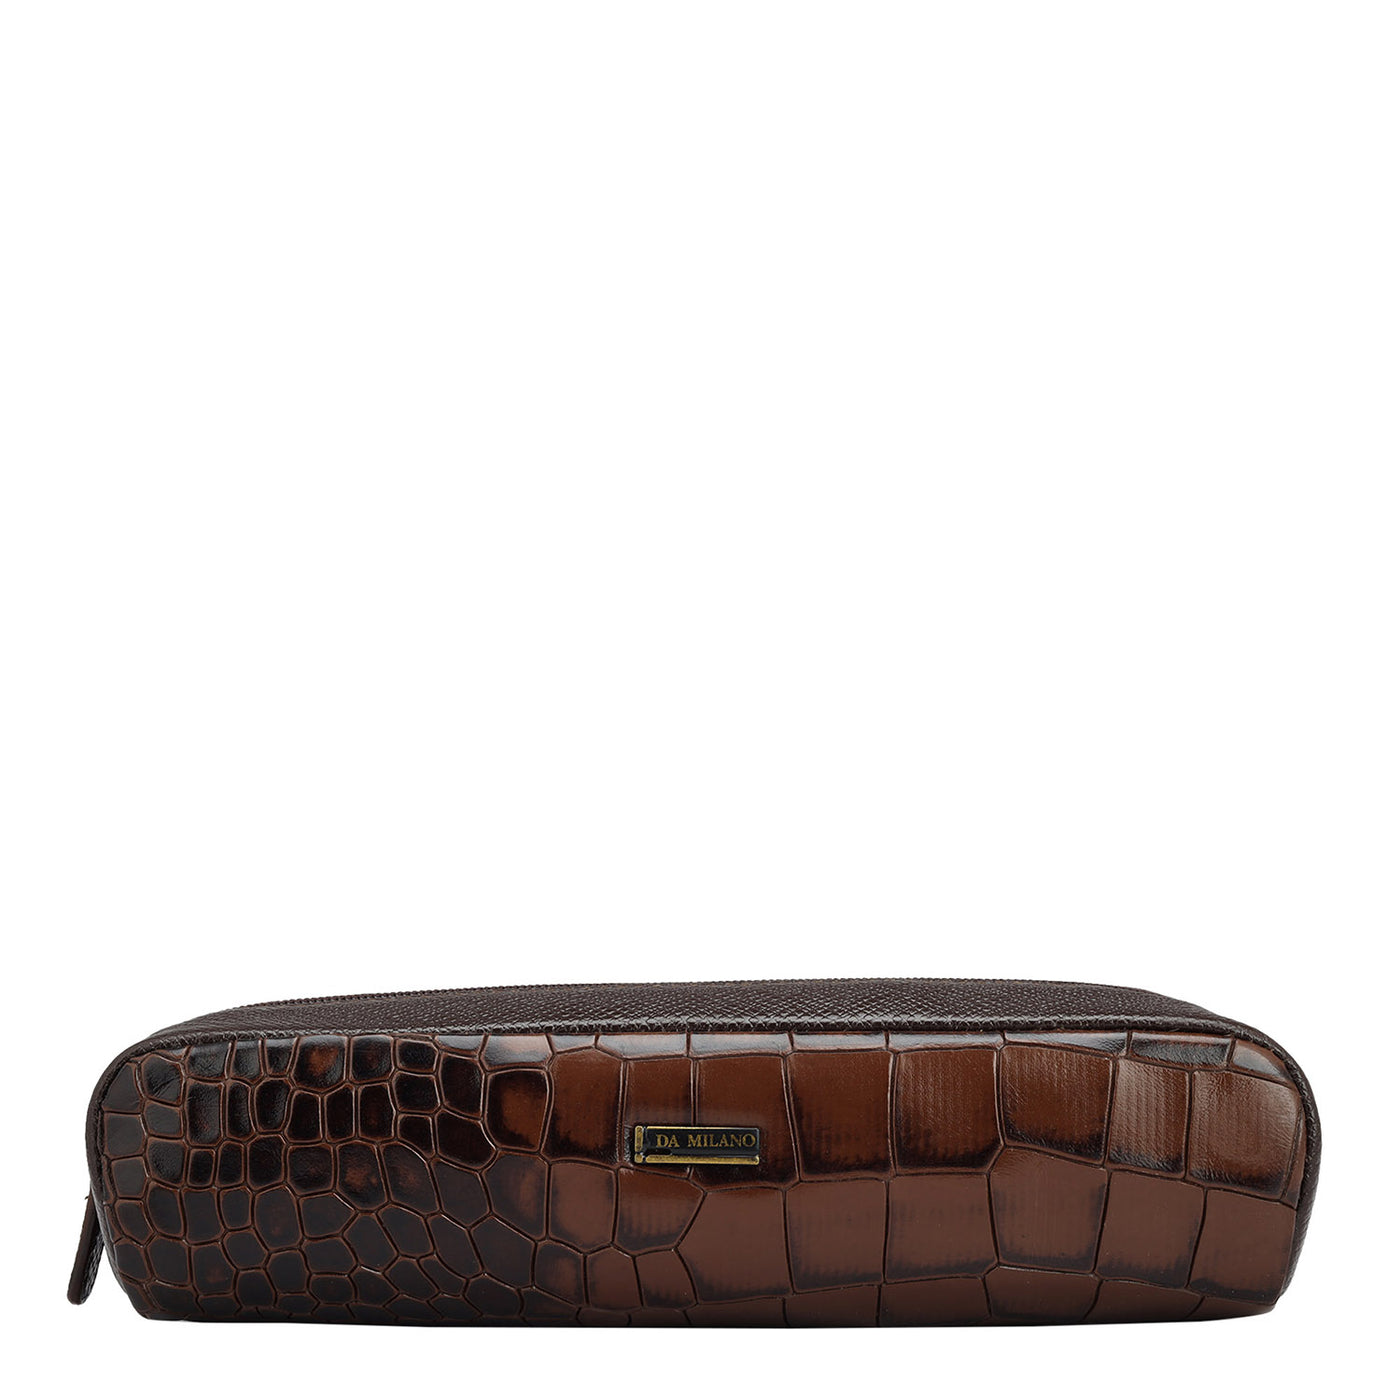 Croco Franzy Leather Multi Pouch - Brown